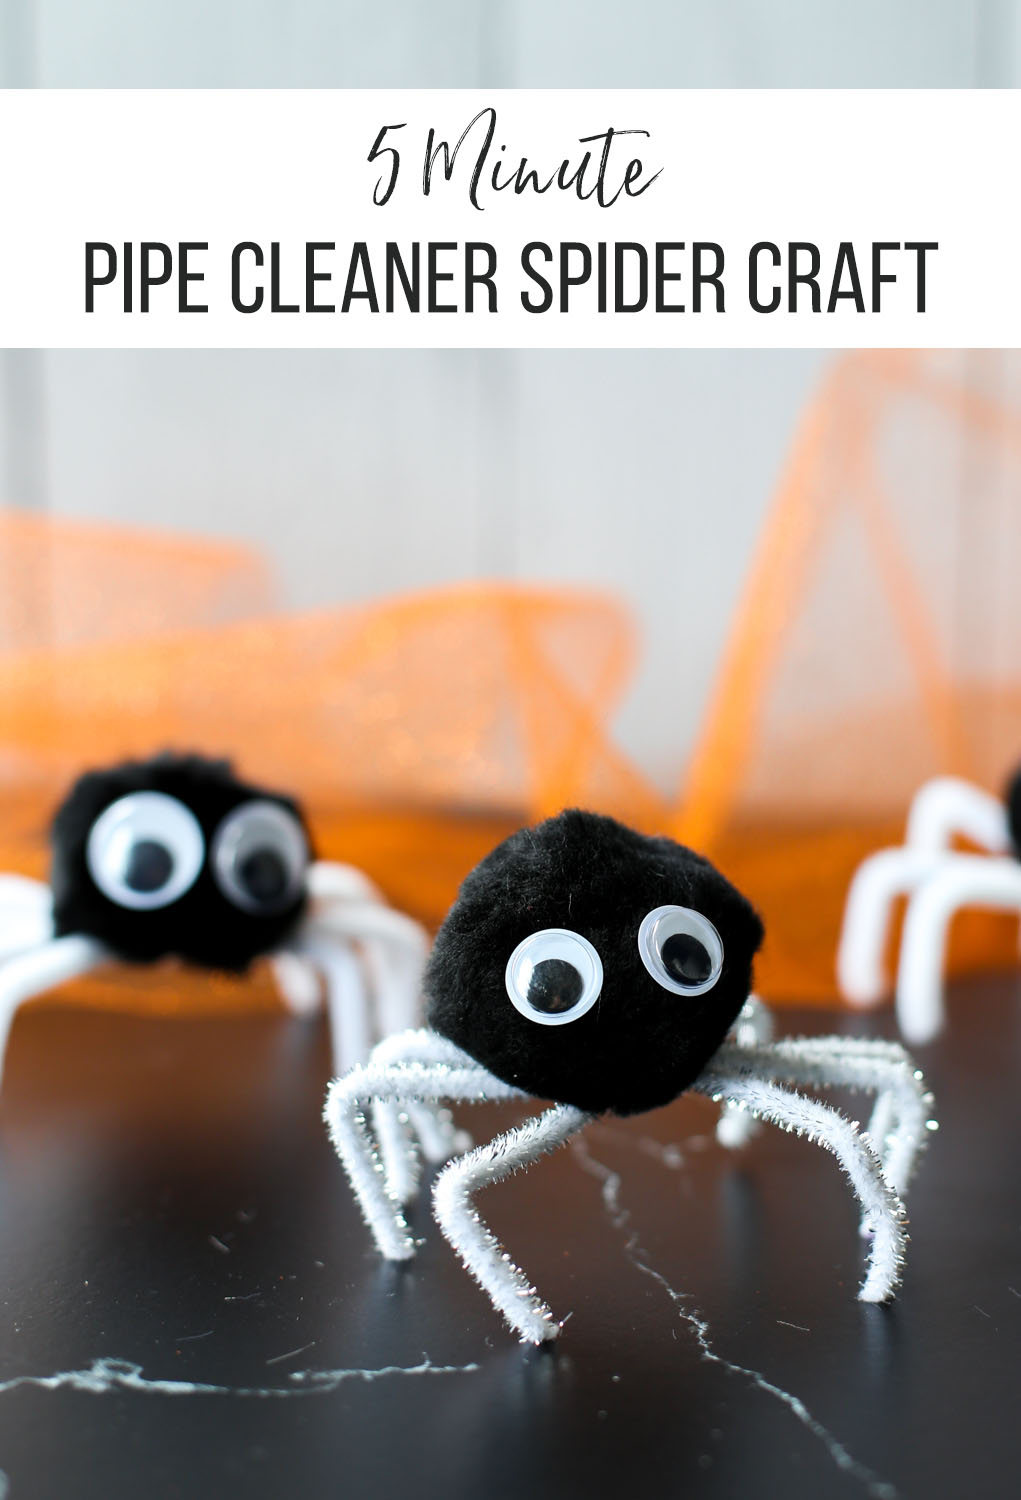 Pipe cleaner spider craft with block pom pom and googly eyes.